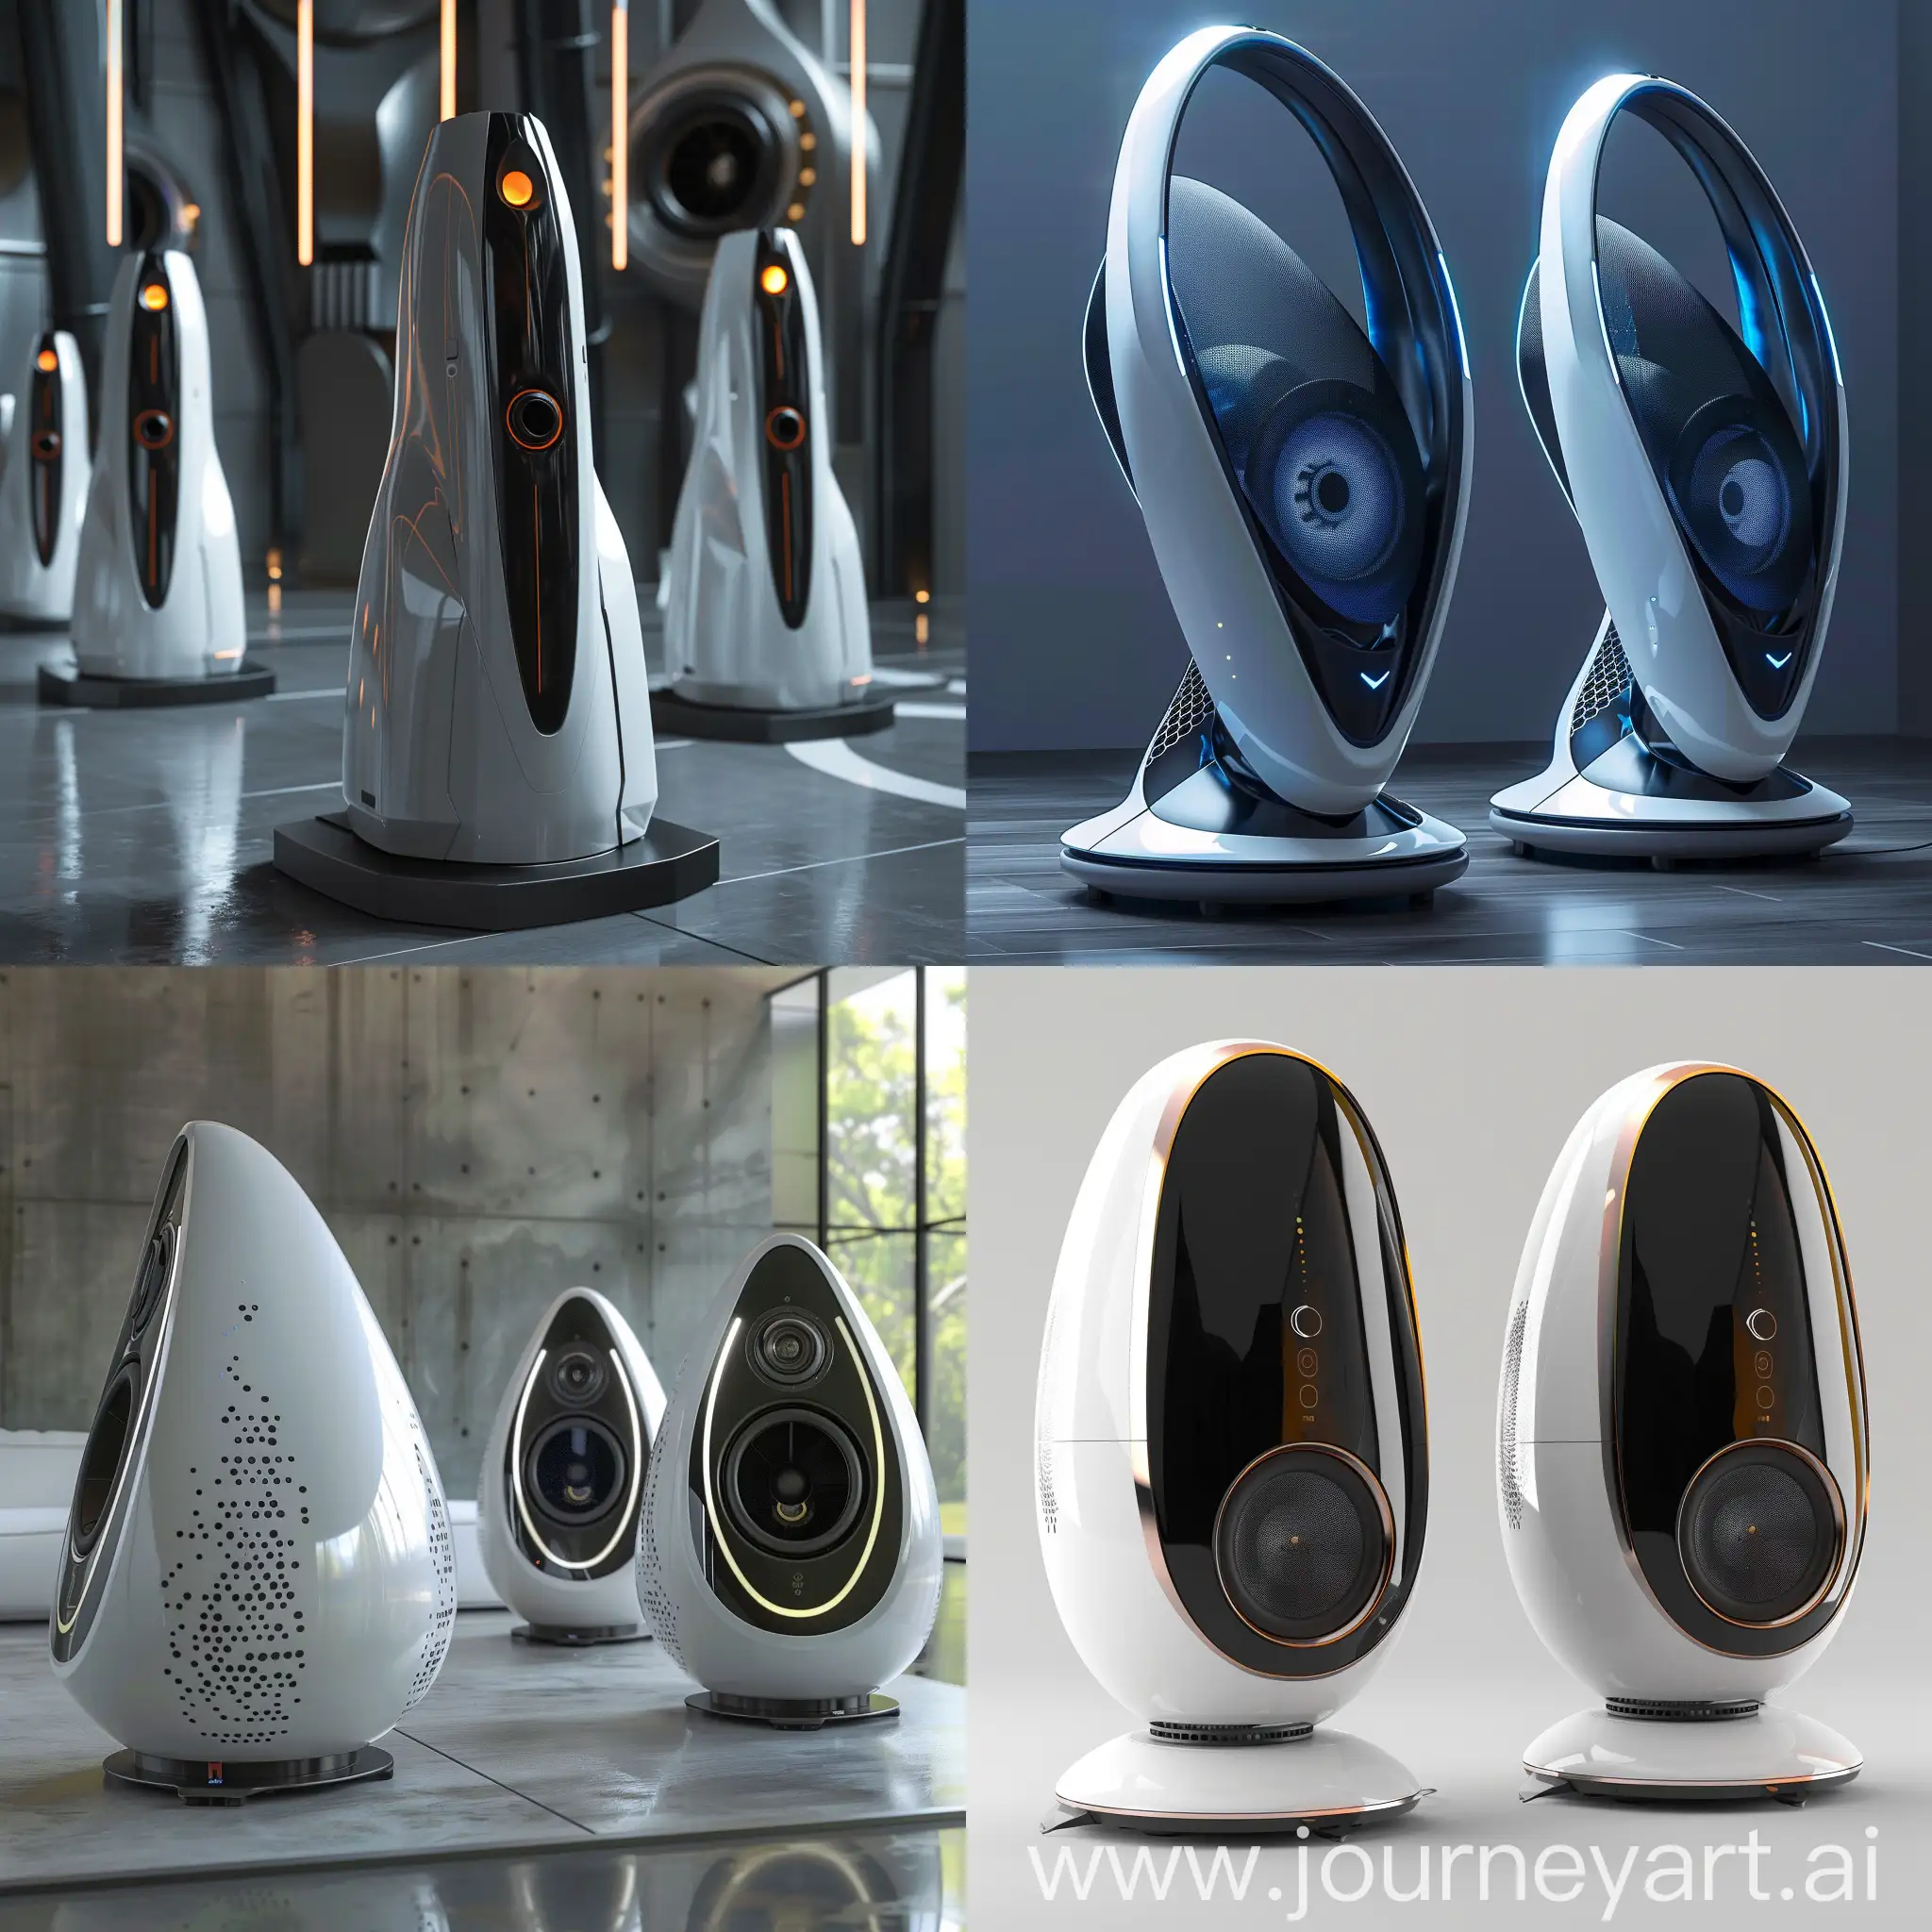 Futuristic-PC-Speakers-with-Advanced-Technology-and-EcoFriendly-Design